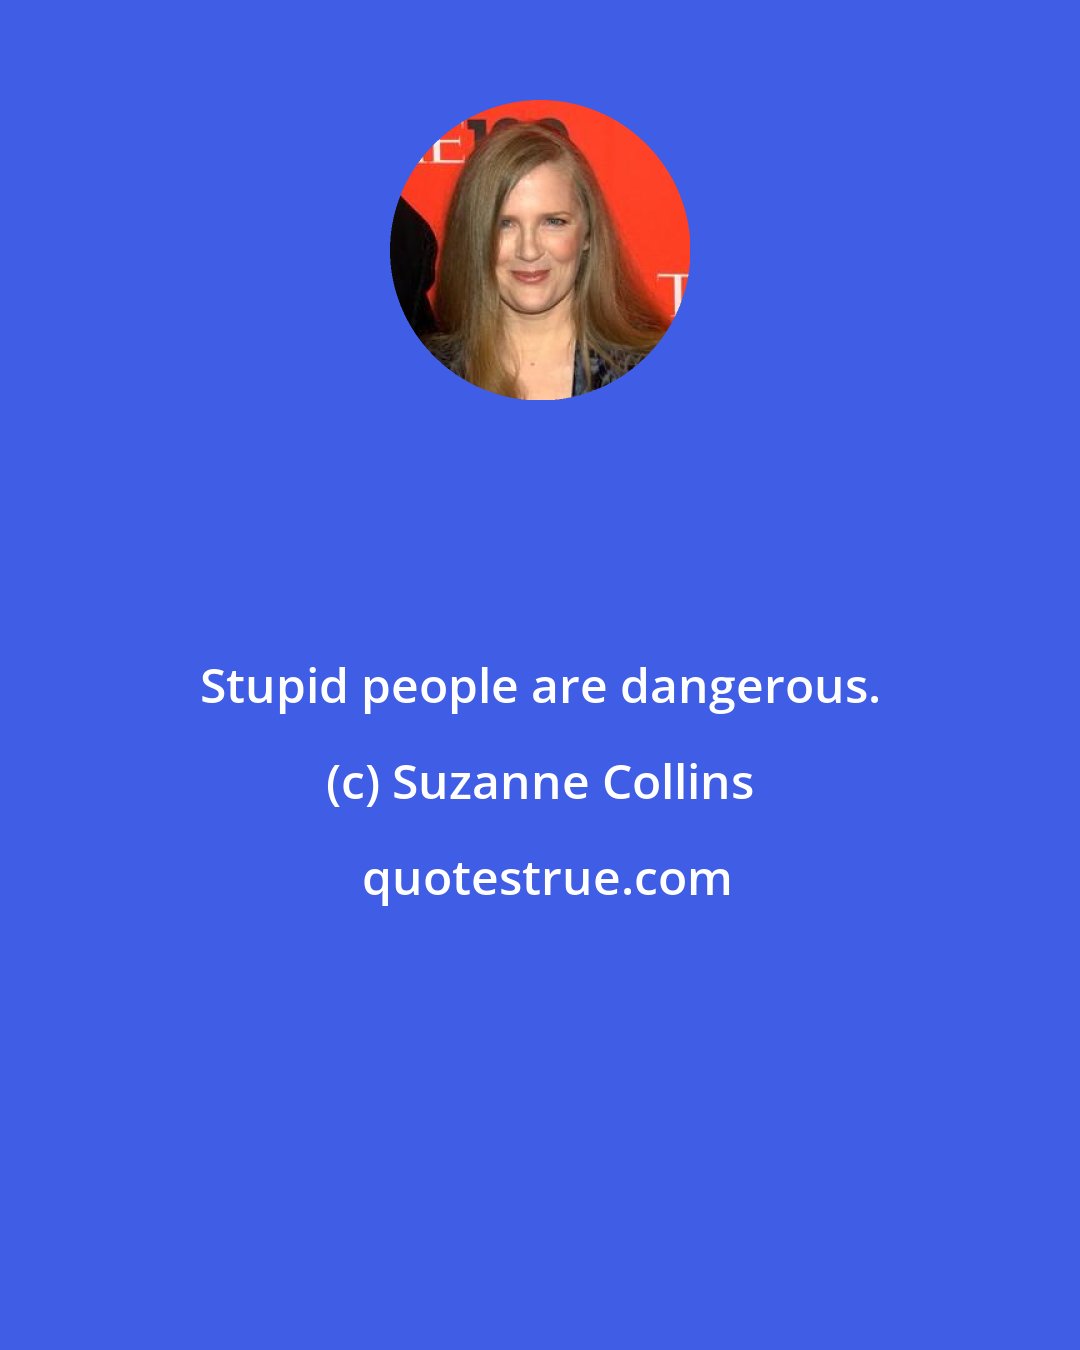 Suzanne Collins: Stupid people are dangerous.